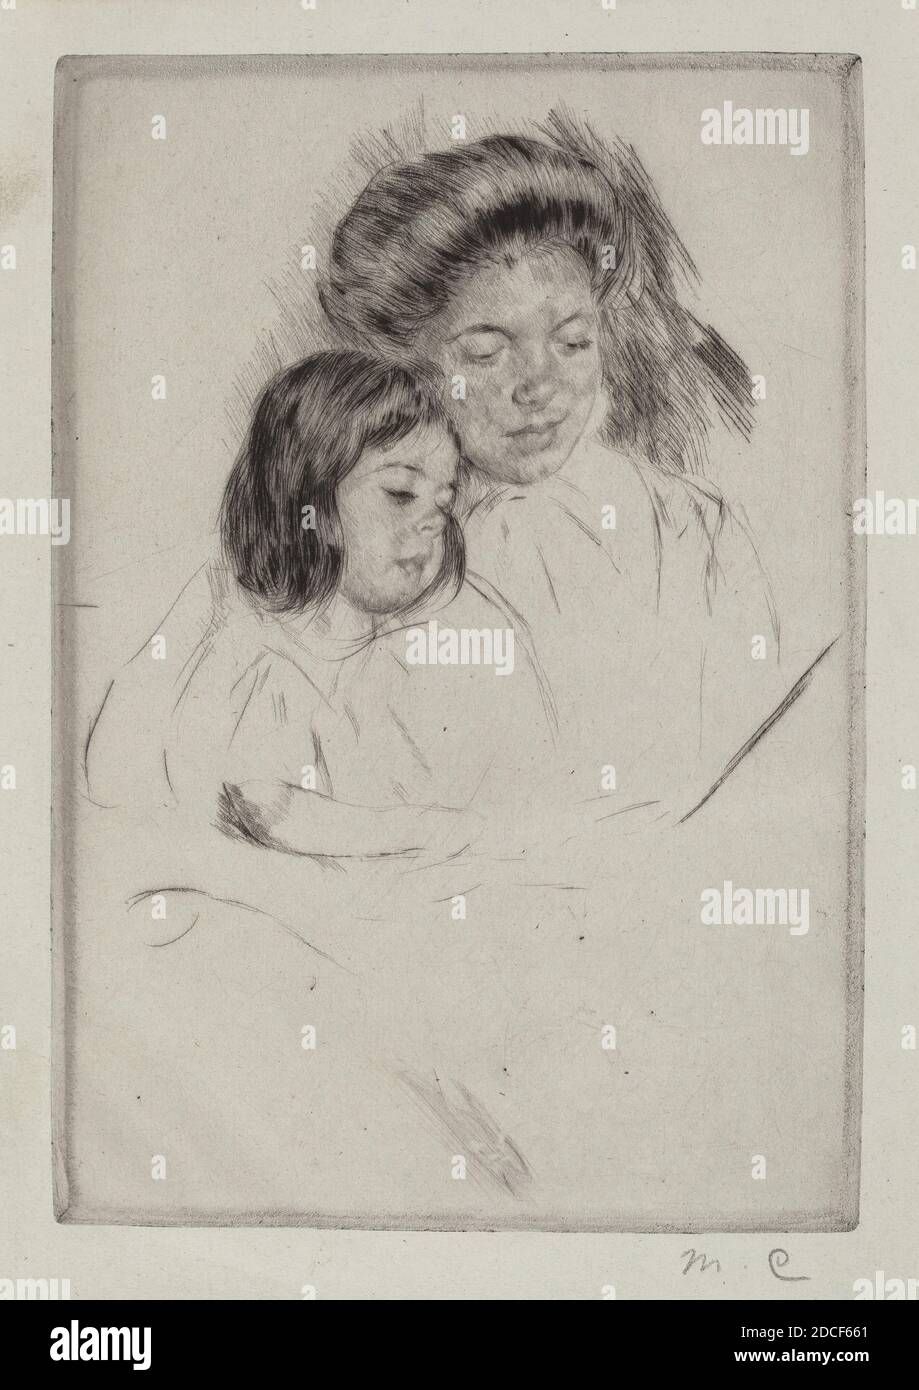 Mary Cassatt, (artist), American, 1844 - 1926, The Picture Book (No. 1), c. 1901, drypoint in black, plate: 22.07 × 14.92 cm (8 11/16 × 5 7/8 in Stock Photo